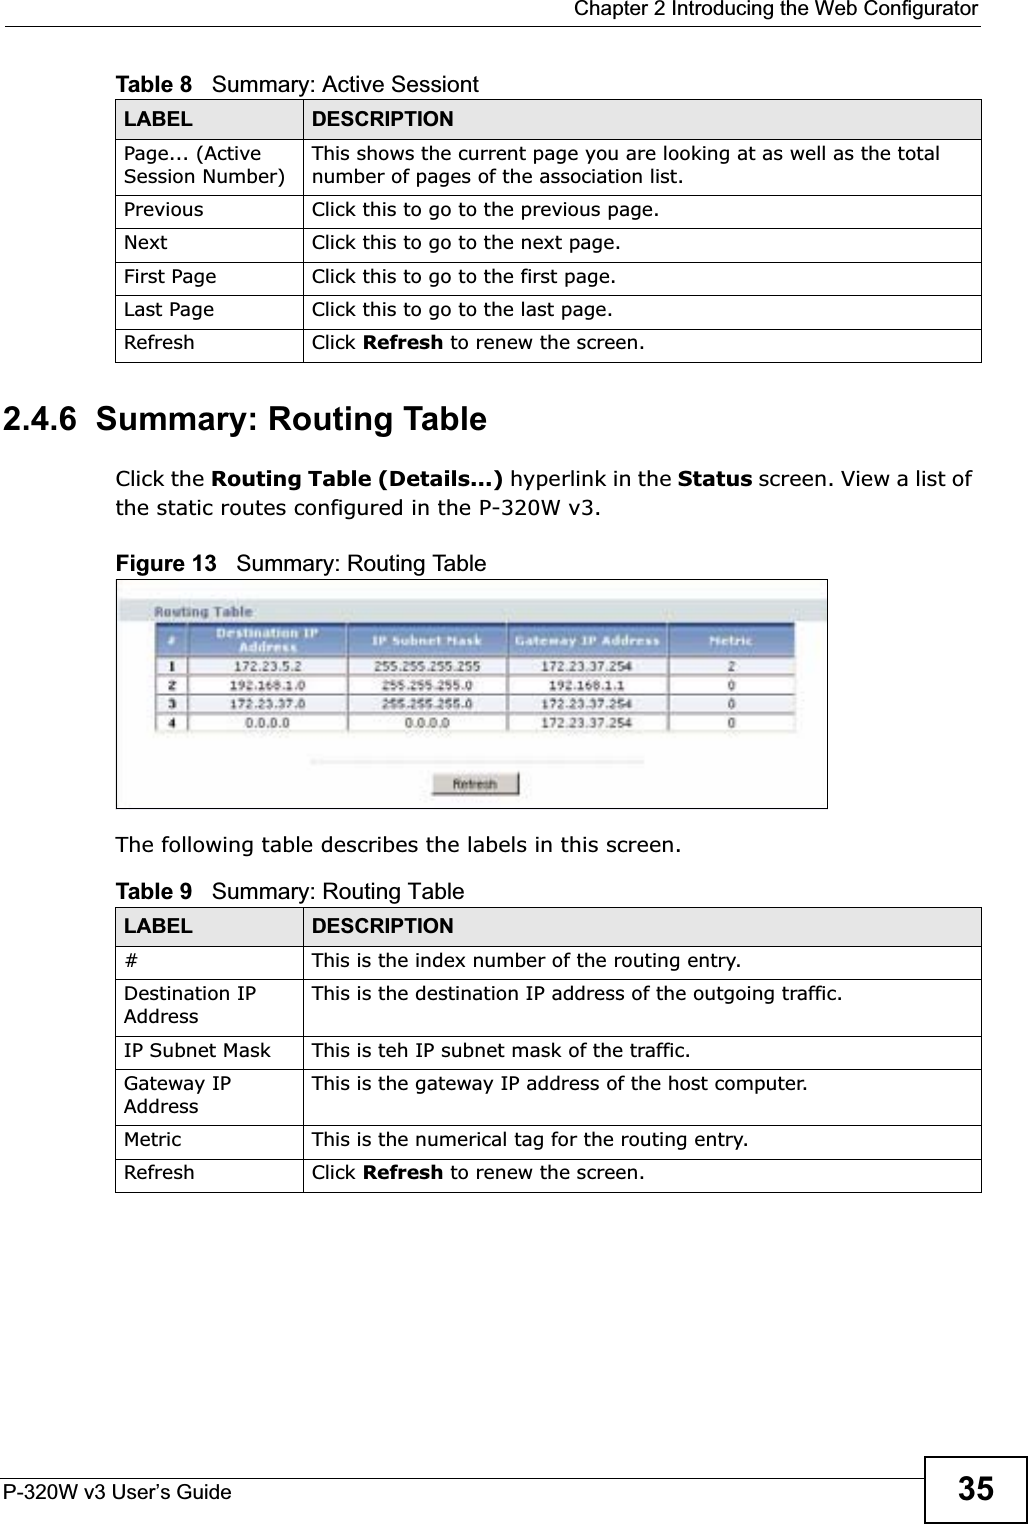  Chapter 2 Introducing the Web ConfiguratorP-320W v3 User’s Guide 352.4.6  Summary: Routing TableClick the Routing Table (Details...) hyperlink in the Status screen. View a list of the static routes configured in the P-320W v3.Figure 13   Summary: Routing Table The following table describes the labels in this screen.Page... (Active Session Number)This shows the current page you are looking at as well as the total number of pages of the association list.Previous Click this to go to the previous page.Next Click this to go to the next page.First Page Click this to go to the first page.Last Page Click this to go to the last page.Refresh Click Refresh to renew the screen. Table 8   Summary: Active SessiontLABEL DESCRIPTIONTable 9   Summary: Routing TableLABEL DESCRIPTION#This is the index number of the routing entry. Destination IP AddressThis is the destination IP address of the outgoing traffic.IP Subnet Mask This is teh IP subnet mask of the traffic.Gateway IP AddressThis is the gateway IP address of the host computer.Metric This is the numerical tag for the routing entry.Refresh Click Refresh to renew the screen. 